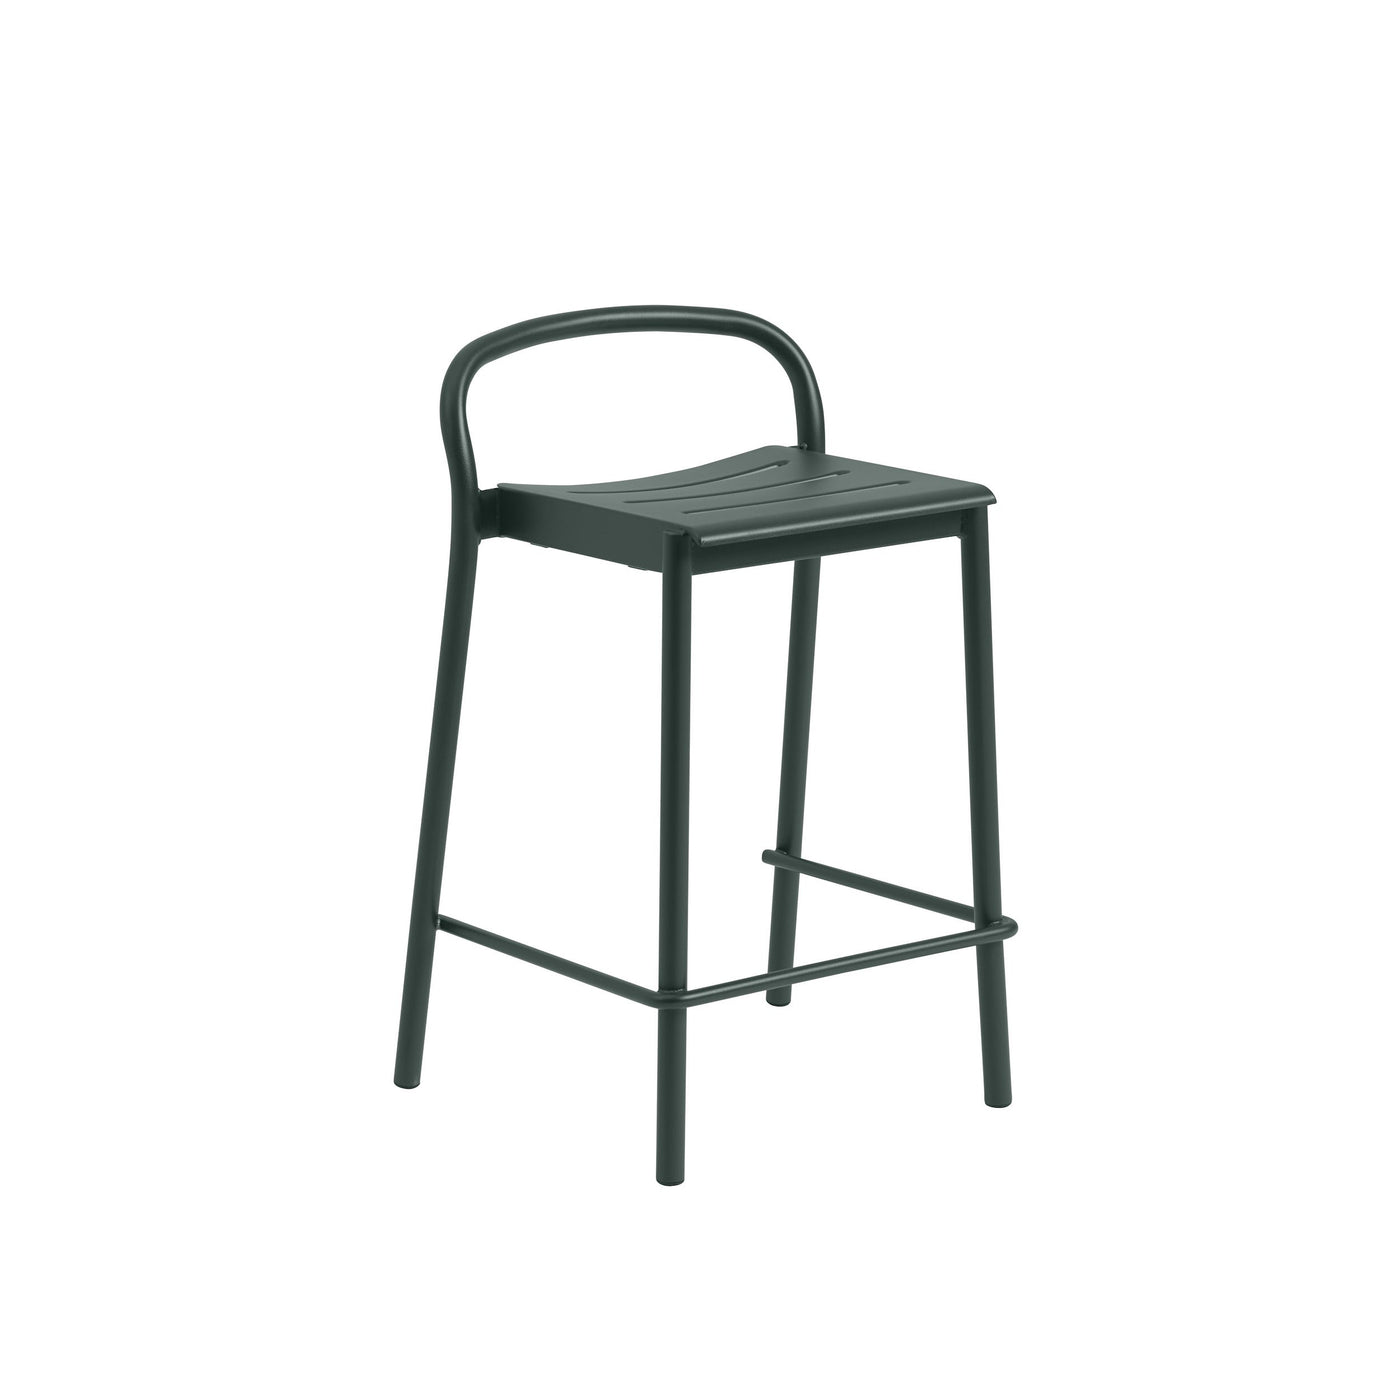 Muuto Linear Steel Counter Stool. Shop outdoor furniture at someday designs. #colour_dark-green